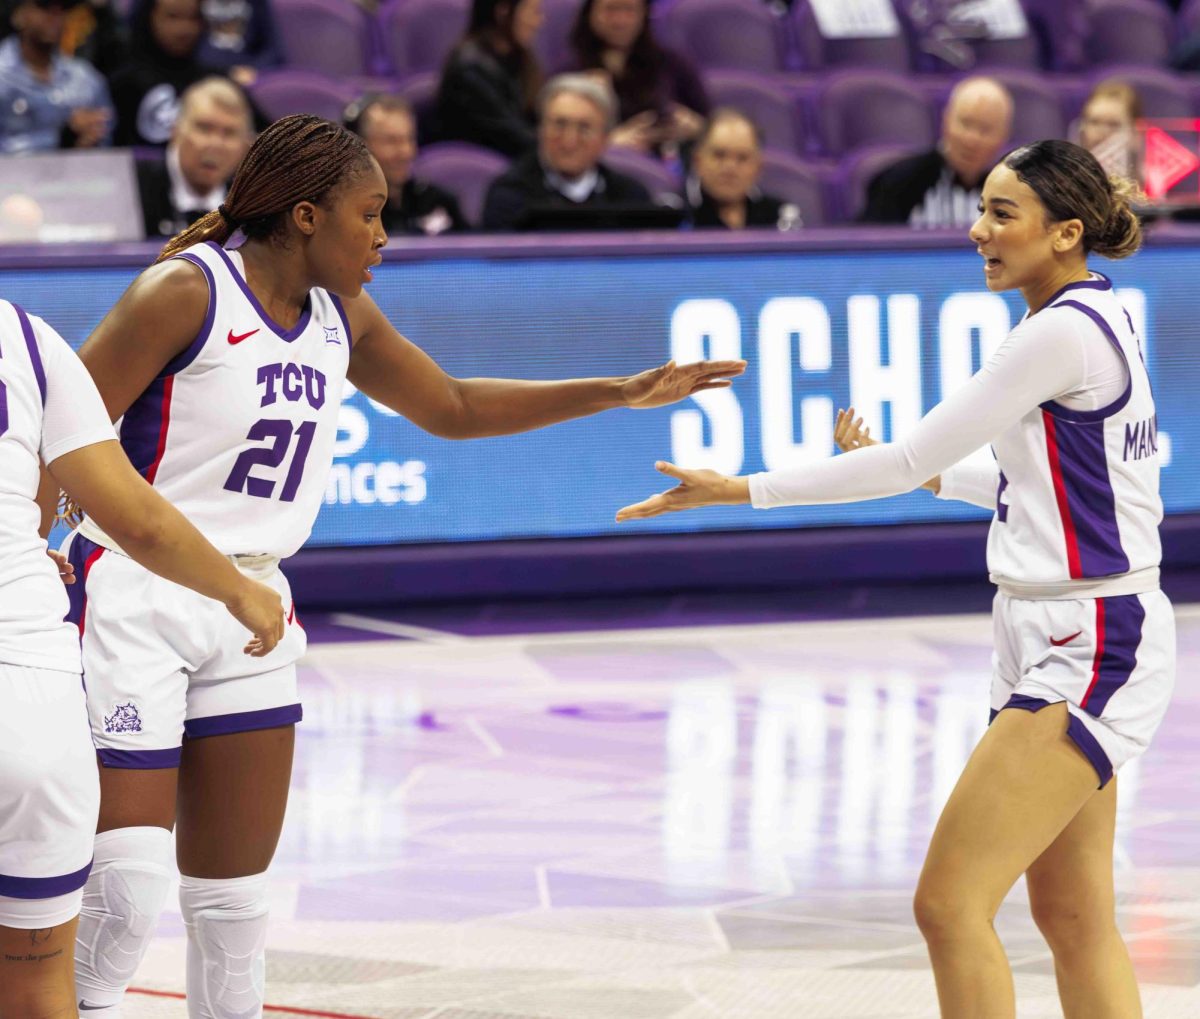 TCU players Agnes Emma-Nnopu and Tara Manumaleuga slap hands at Ed and Rae Schollmaier Arena in Fort Worth, Texas on February 3, 2024. The TCU Horned Frogs fell to the Kansas Jayhawks 74-81. (TCU360/ Tyler Chan)